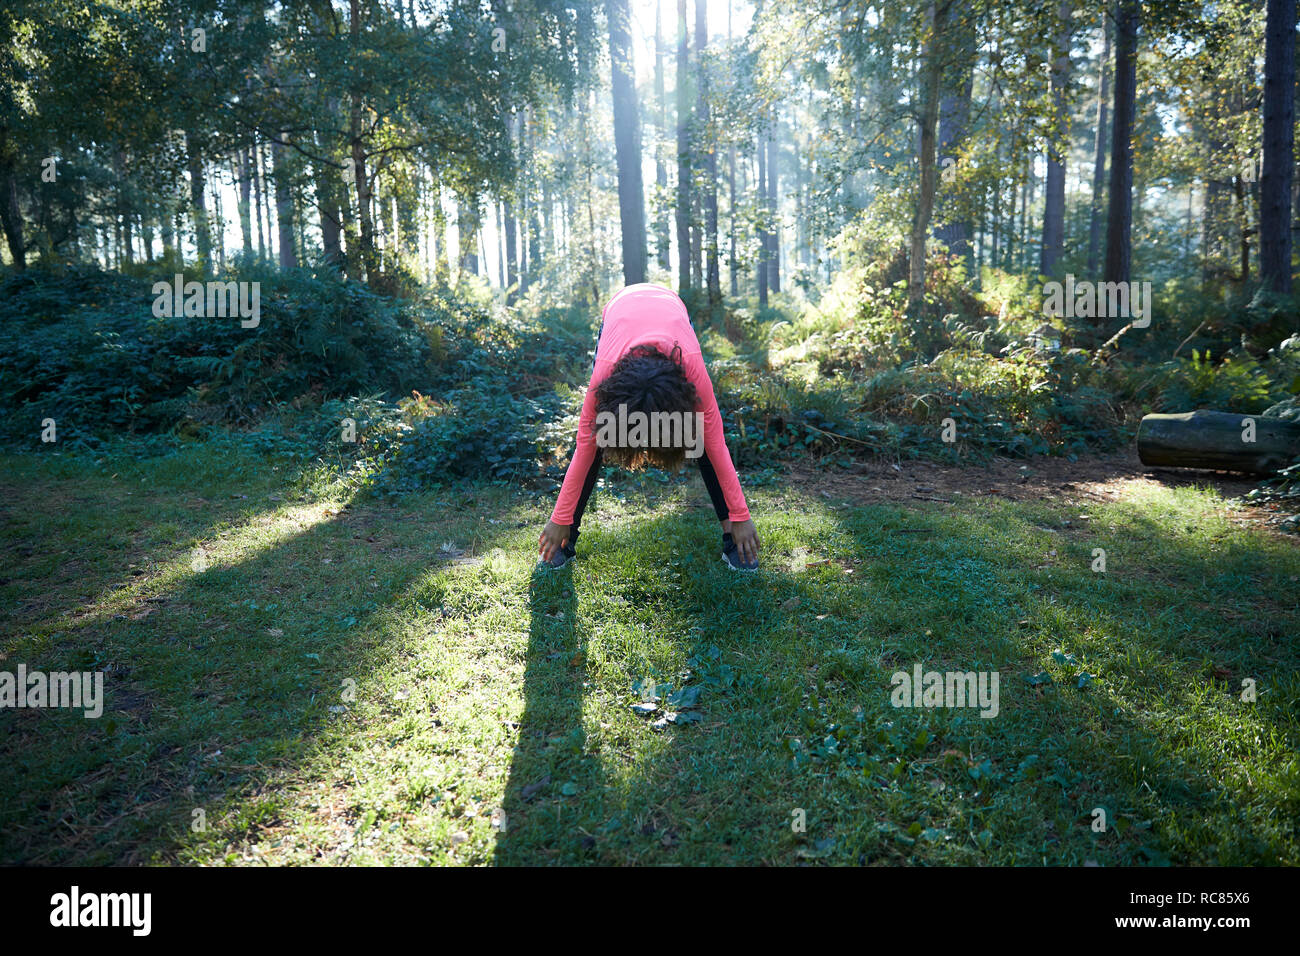 Young female bending forward stretching in forest Stock Photo